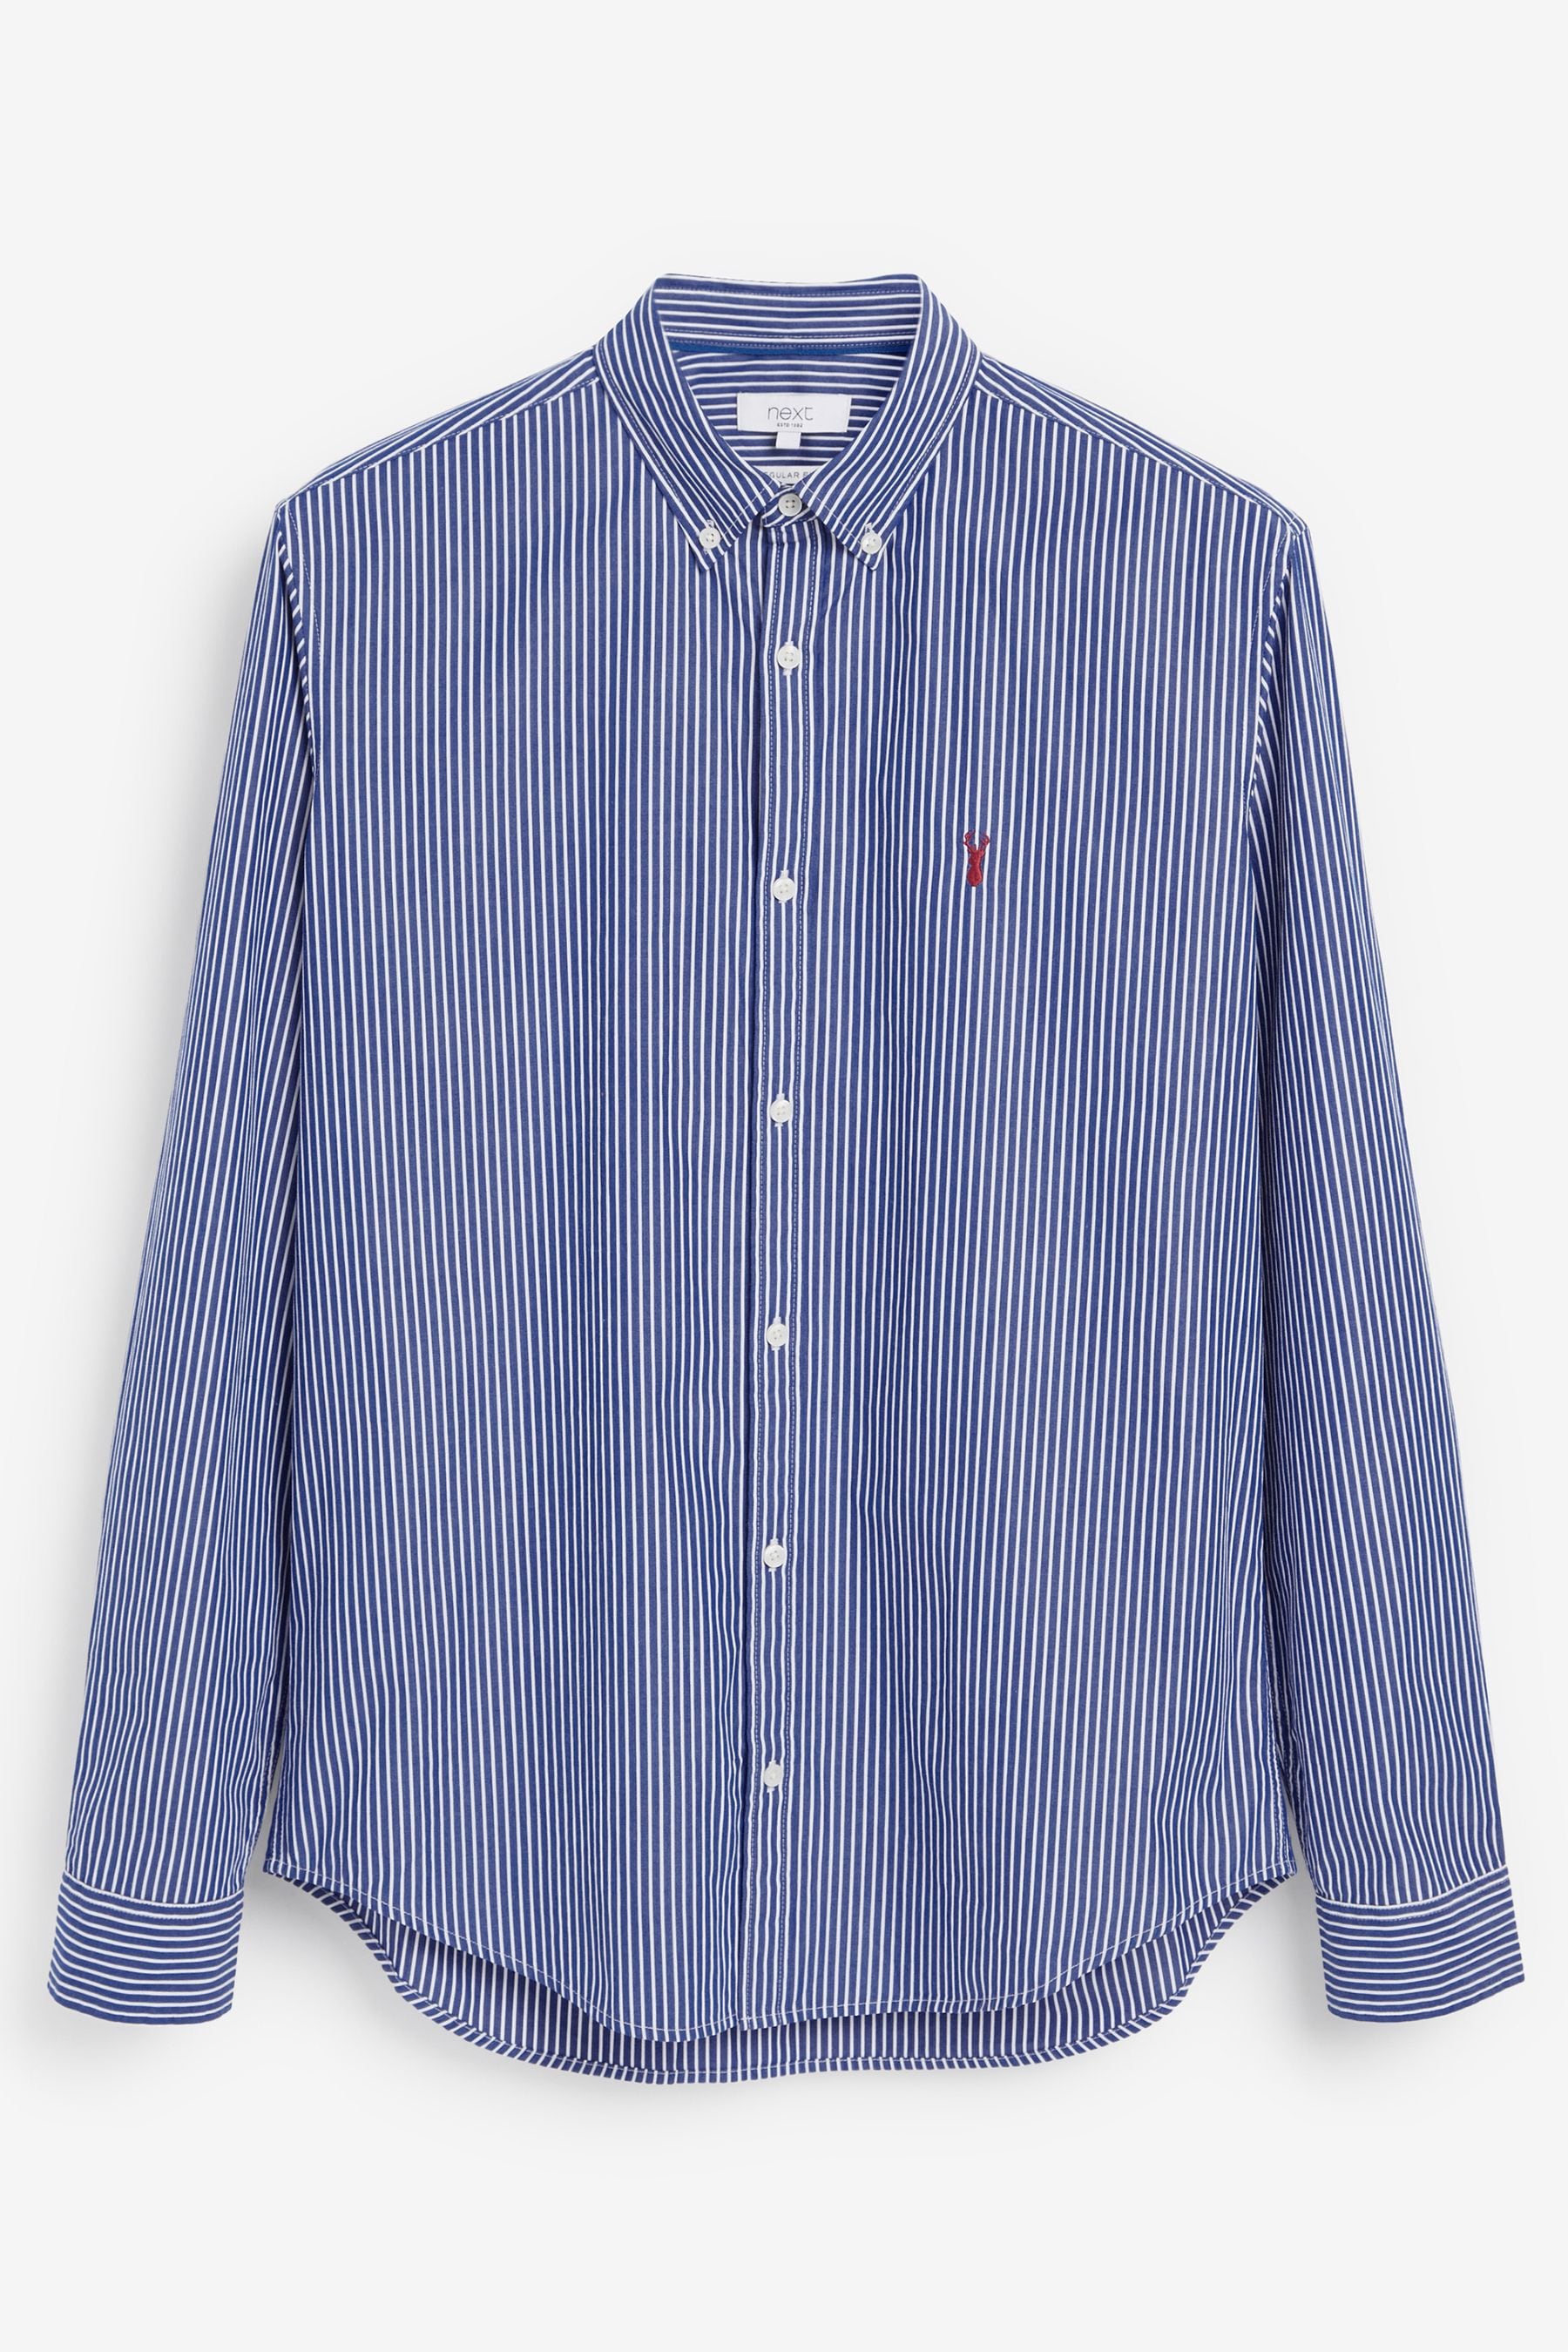 Buy Navy/White Stripe Long Sleeve Shirt from the Next UK online shop